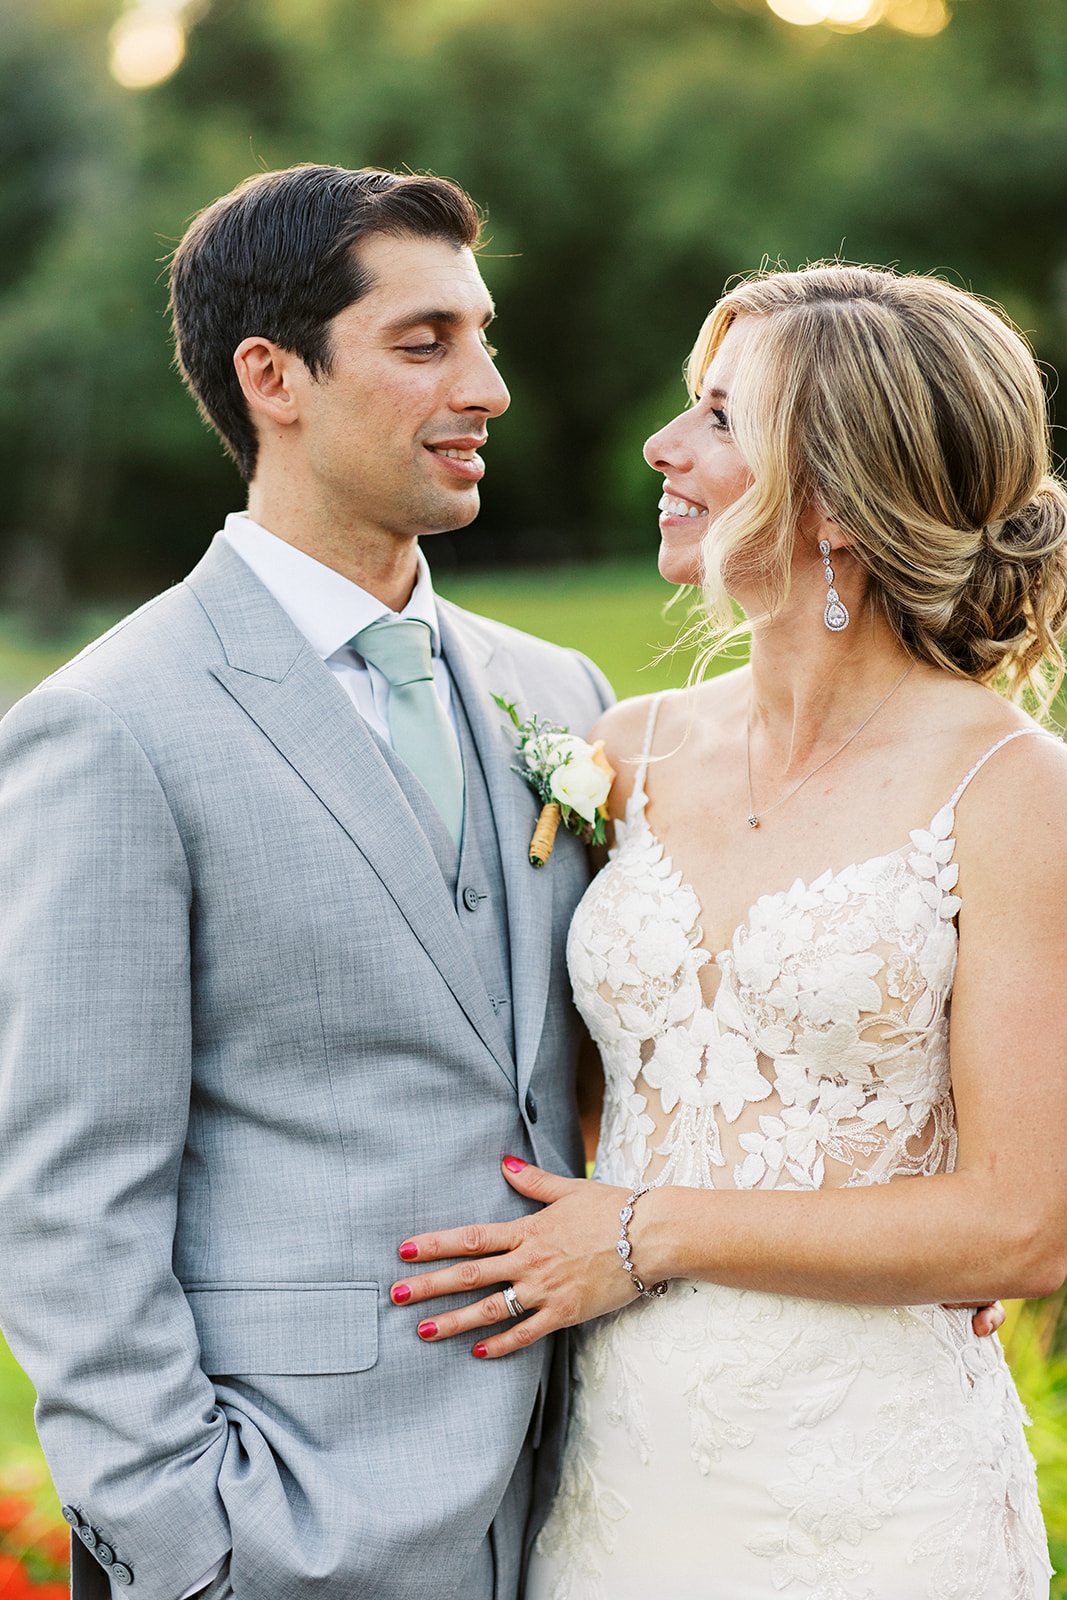 Newlyweds smile at each other while standing in a garden at sunset